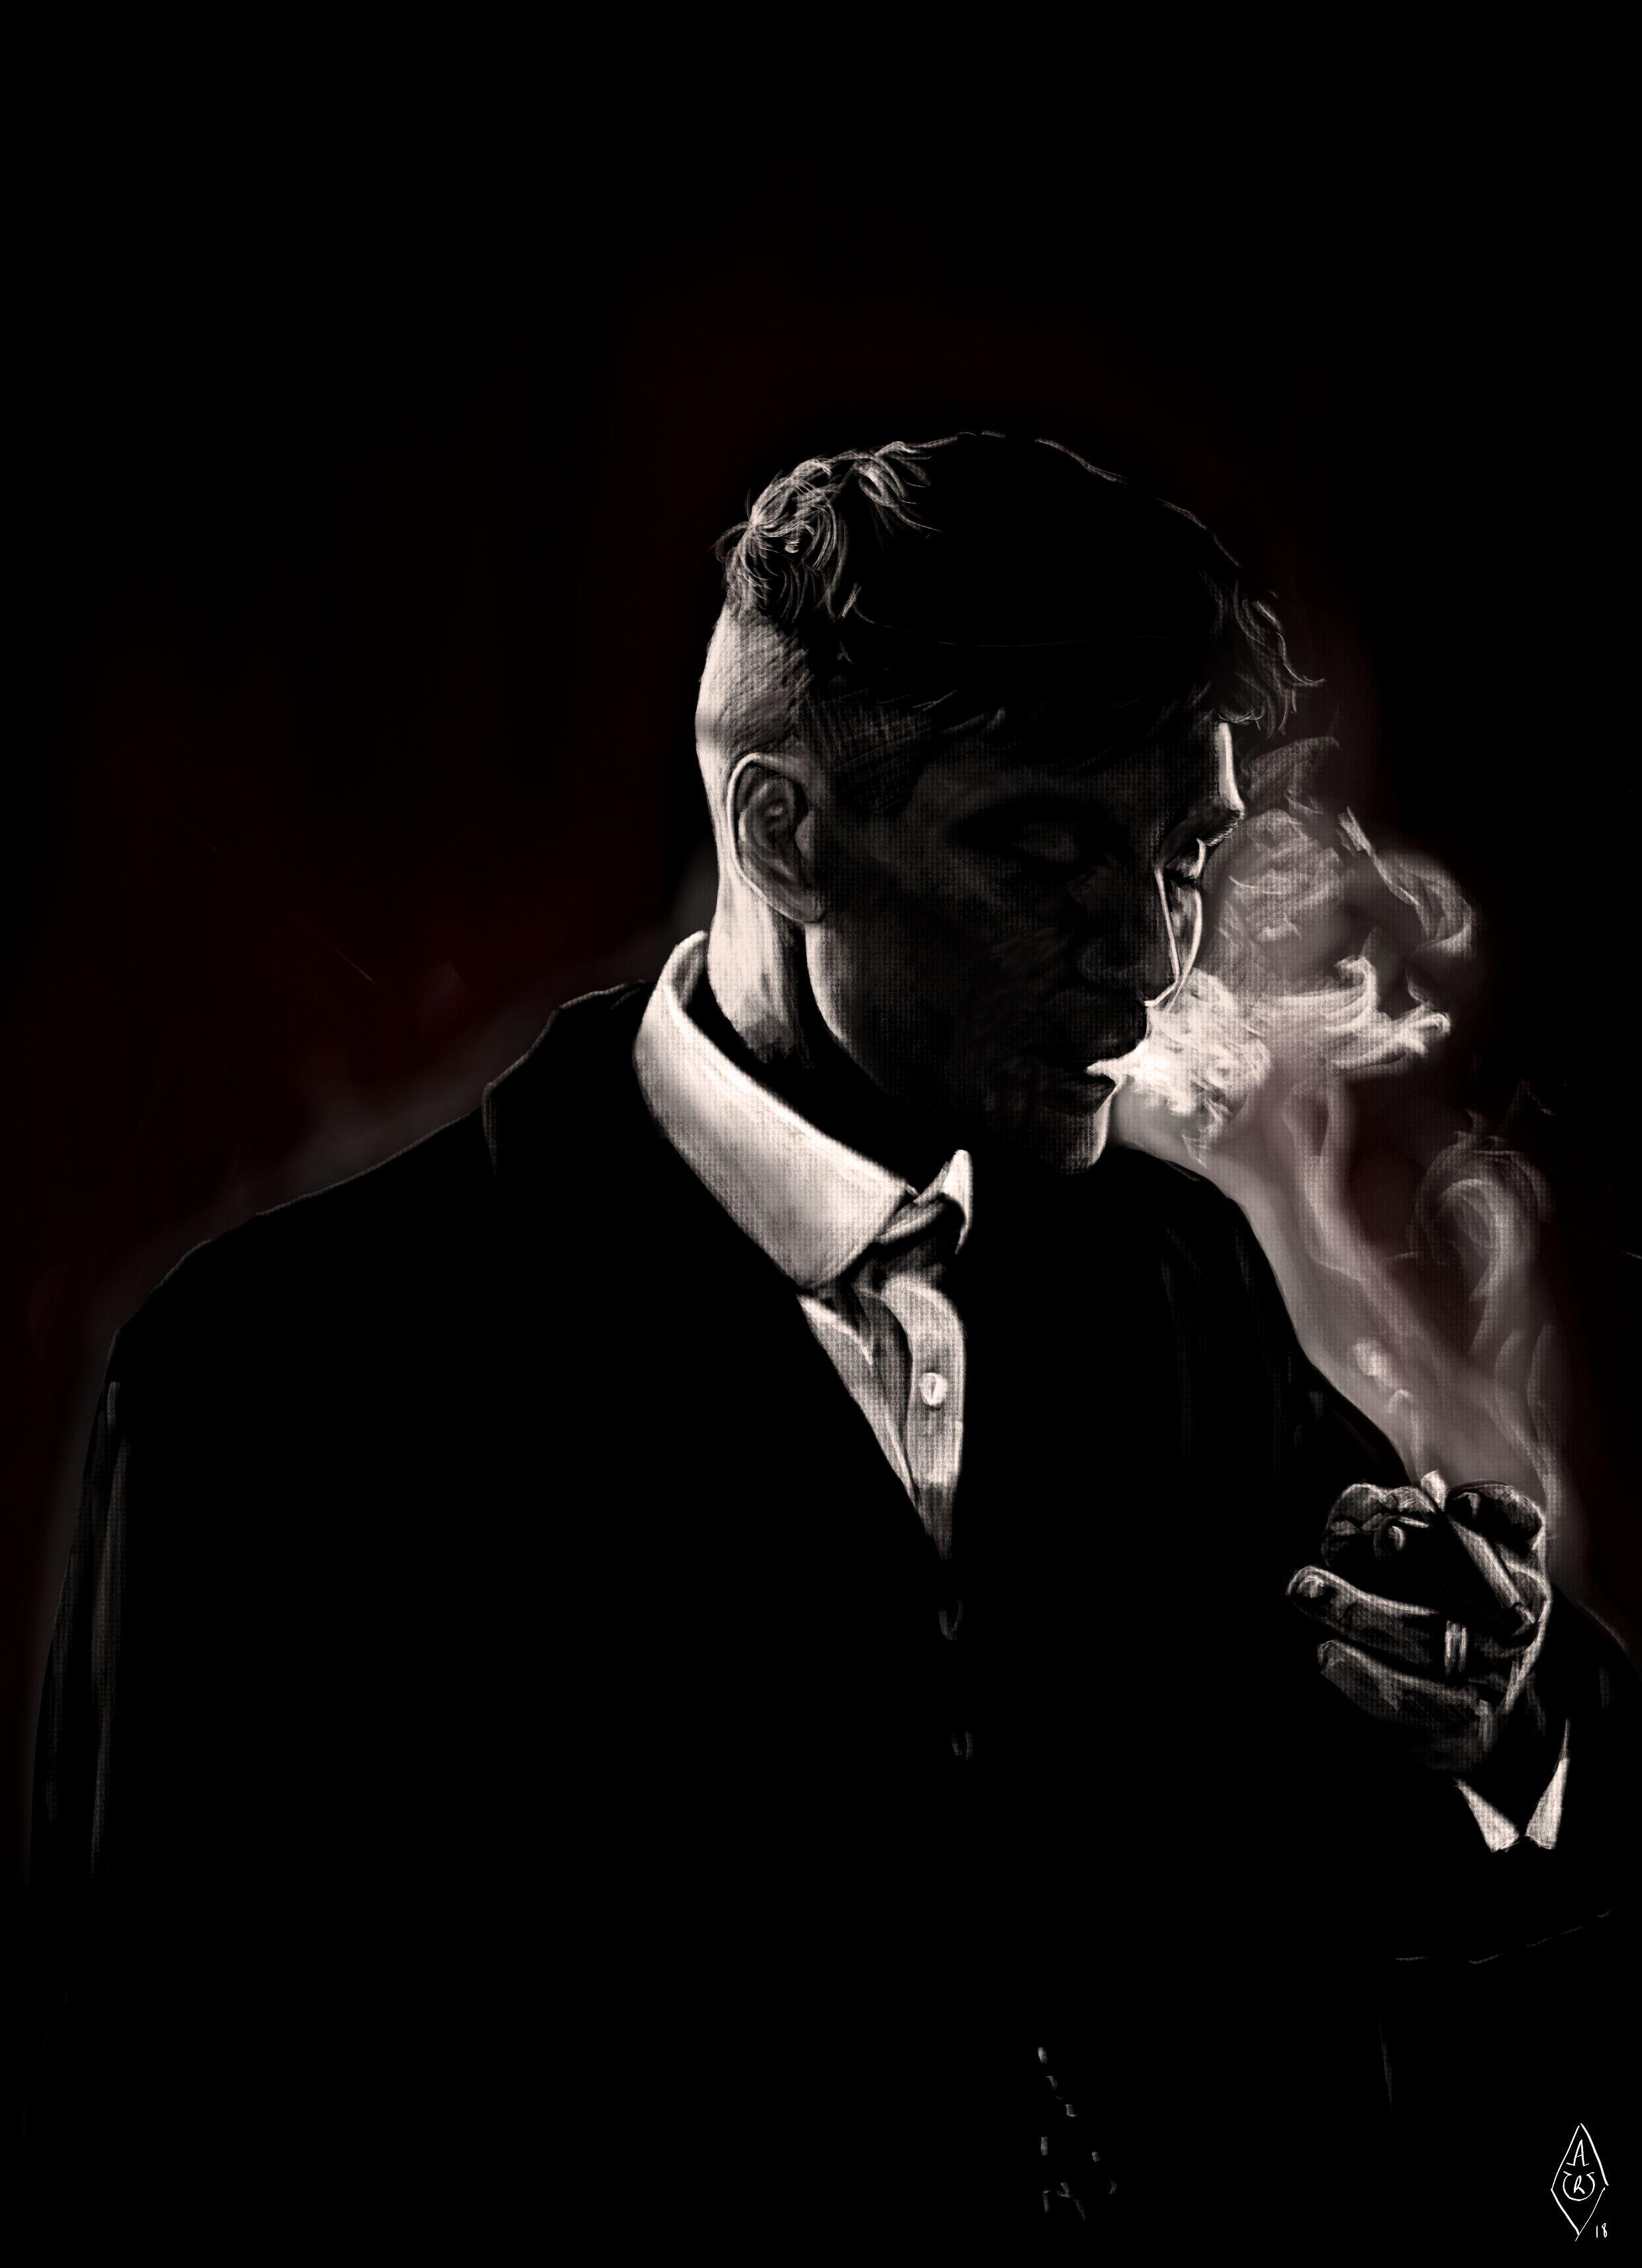 Thomas Shelby 4k For Mobile Wallpapers - Wallpaper Cave